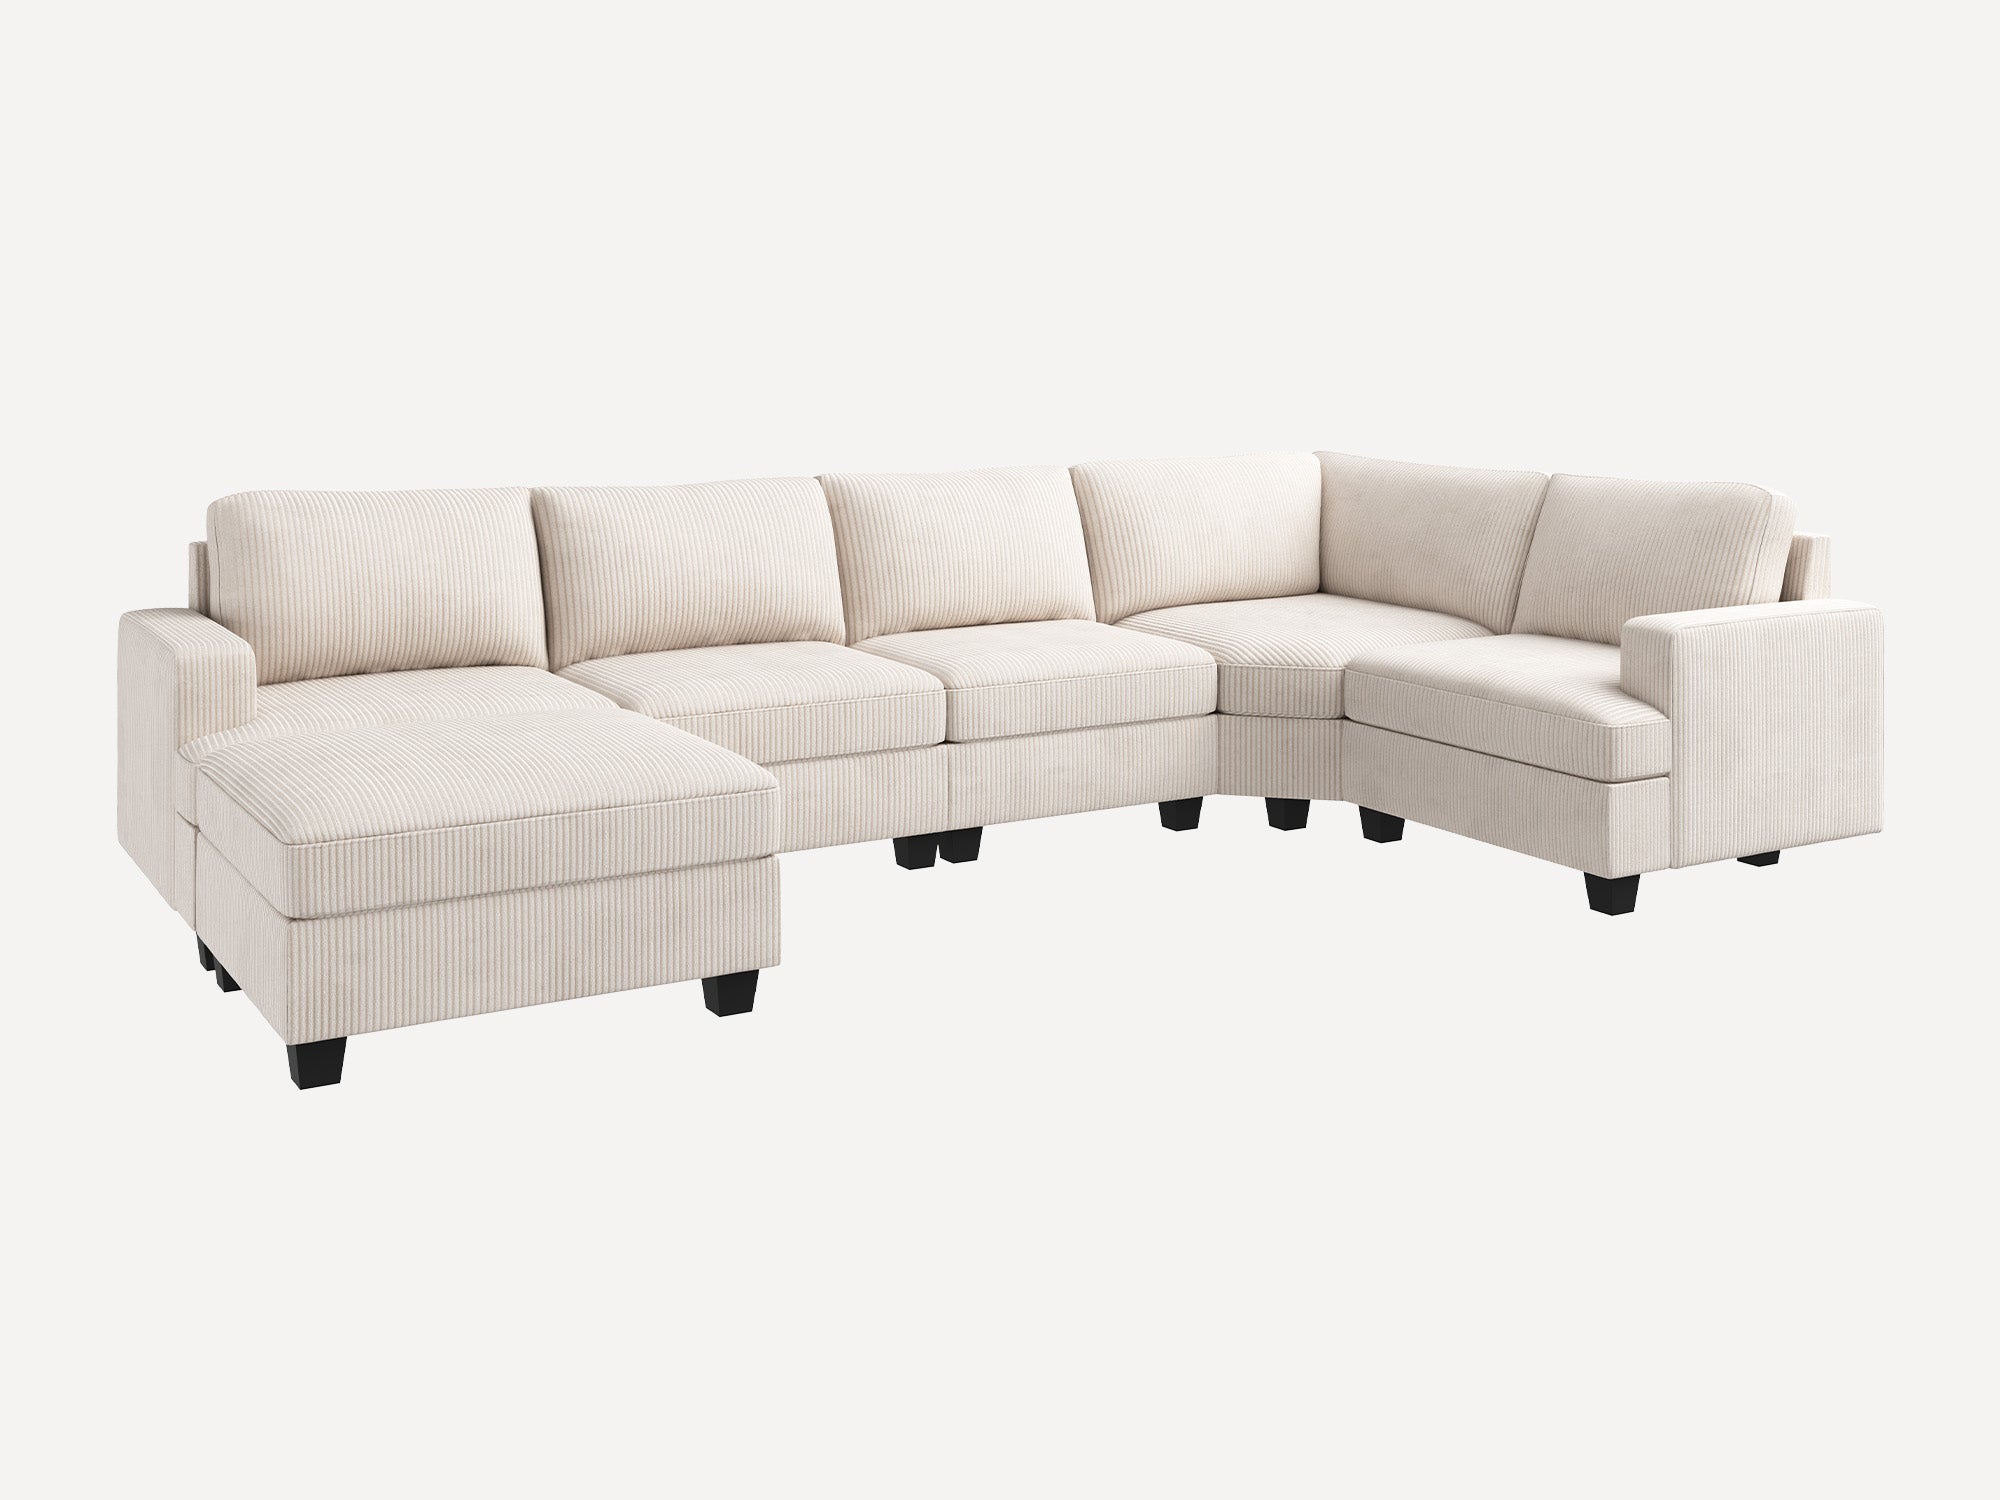 HONBAY 6 Piece Modular Sectional With Storage Ottoman